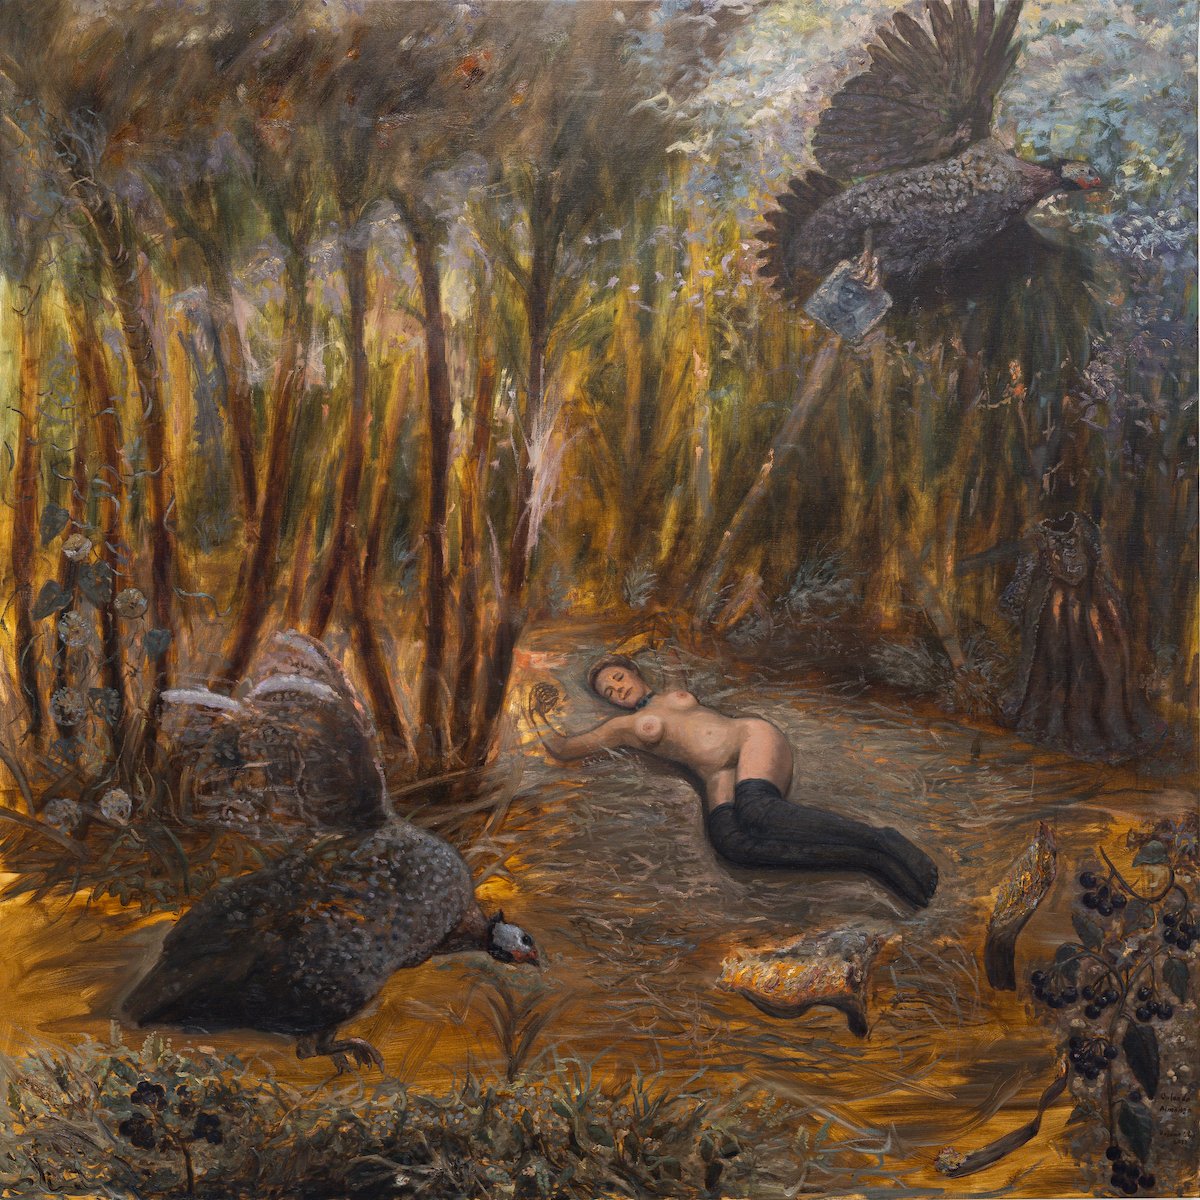 "The River of Paradise" Original Oil Painting of Nude Woman Lying in Lush Jungle by Orlando Almanza @ Soapbox Arts Gallery, Burlington, Vermont